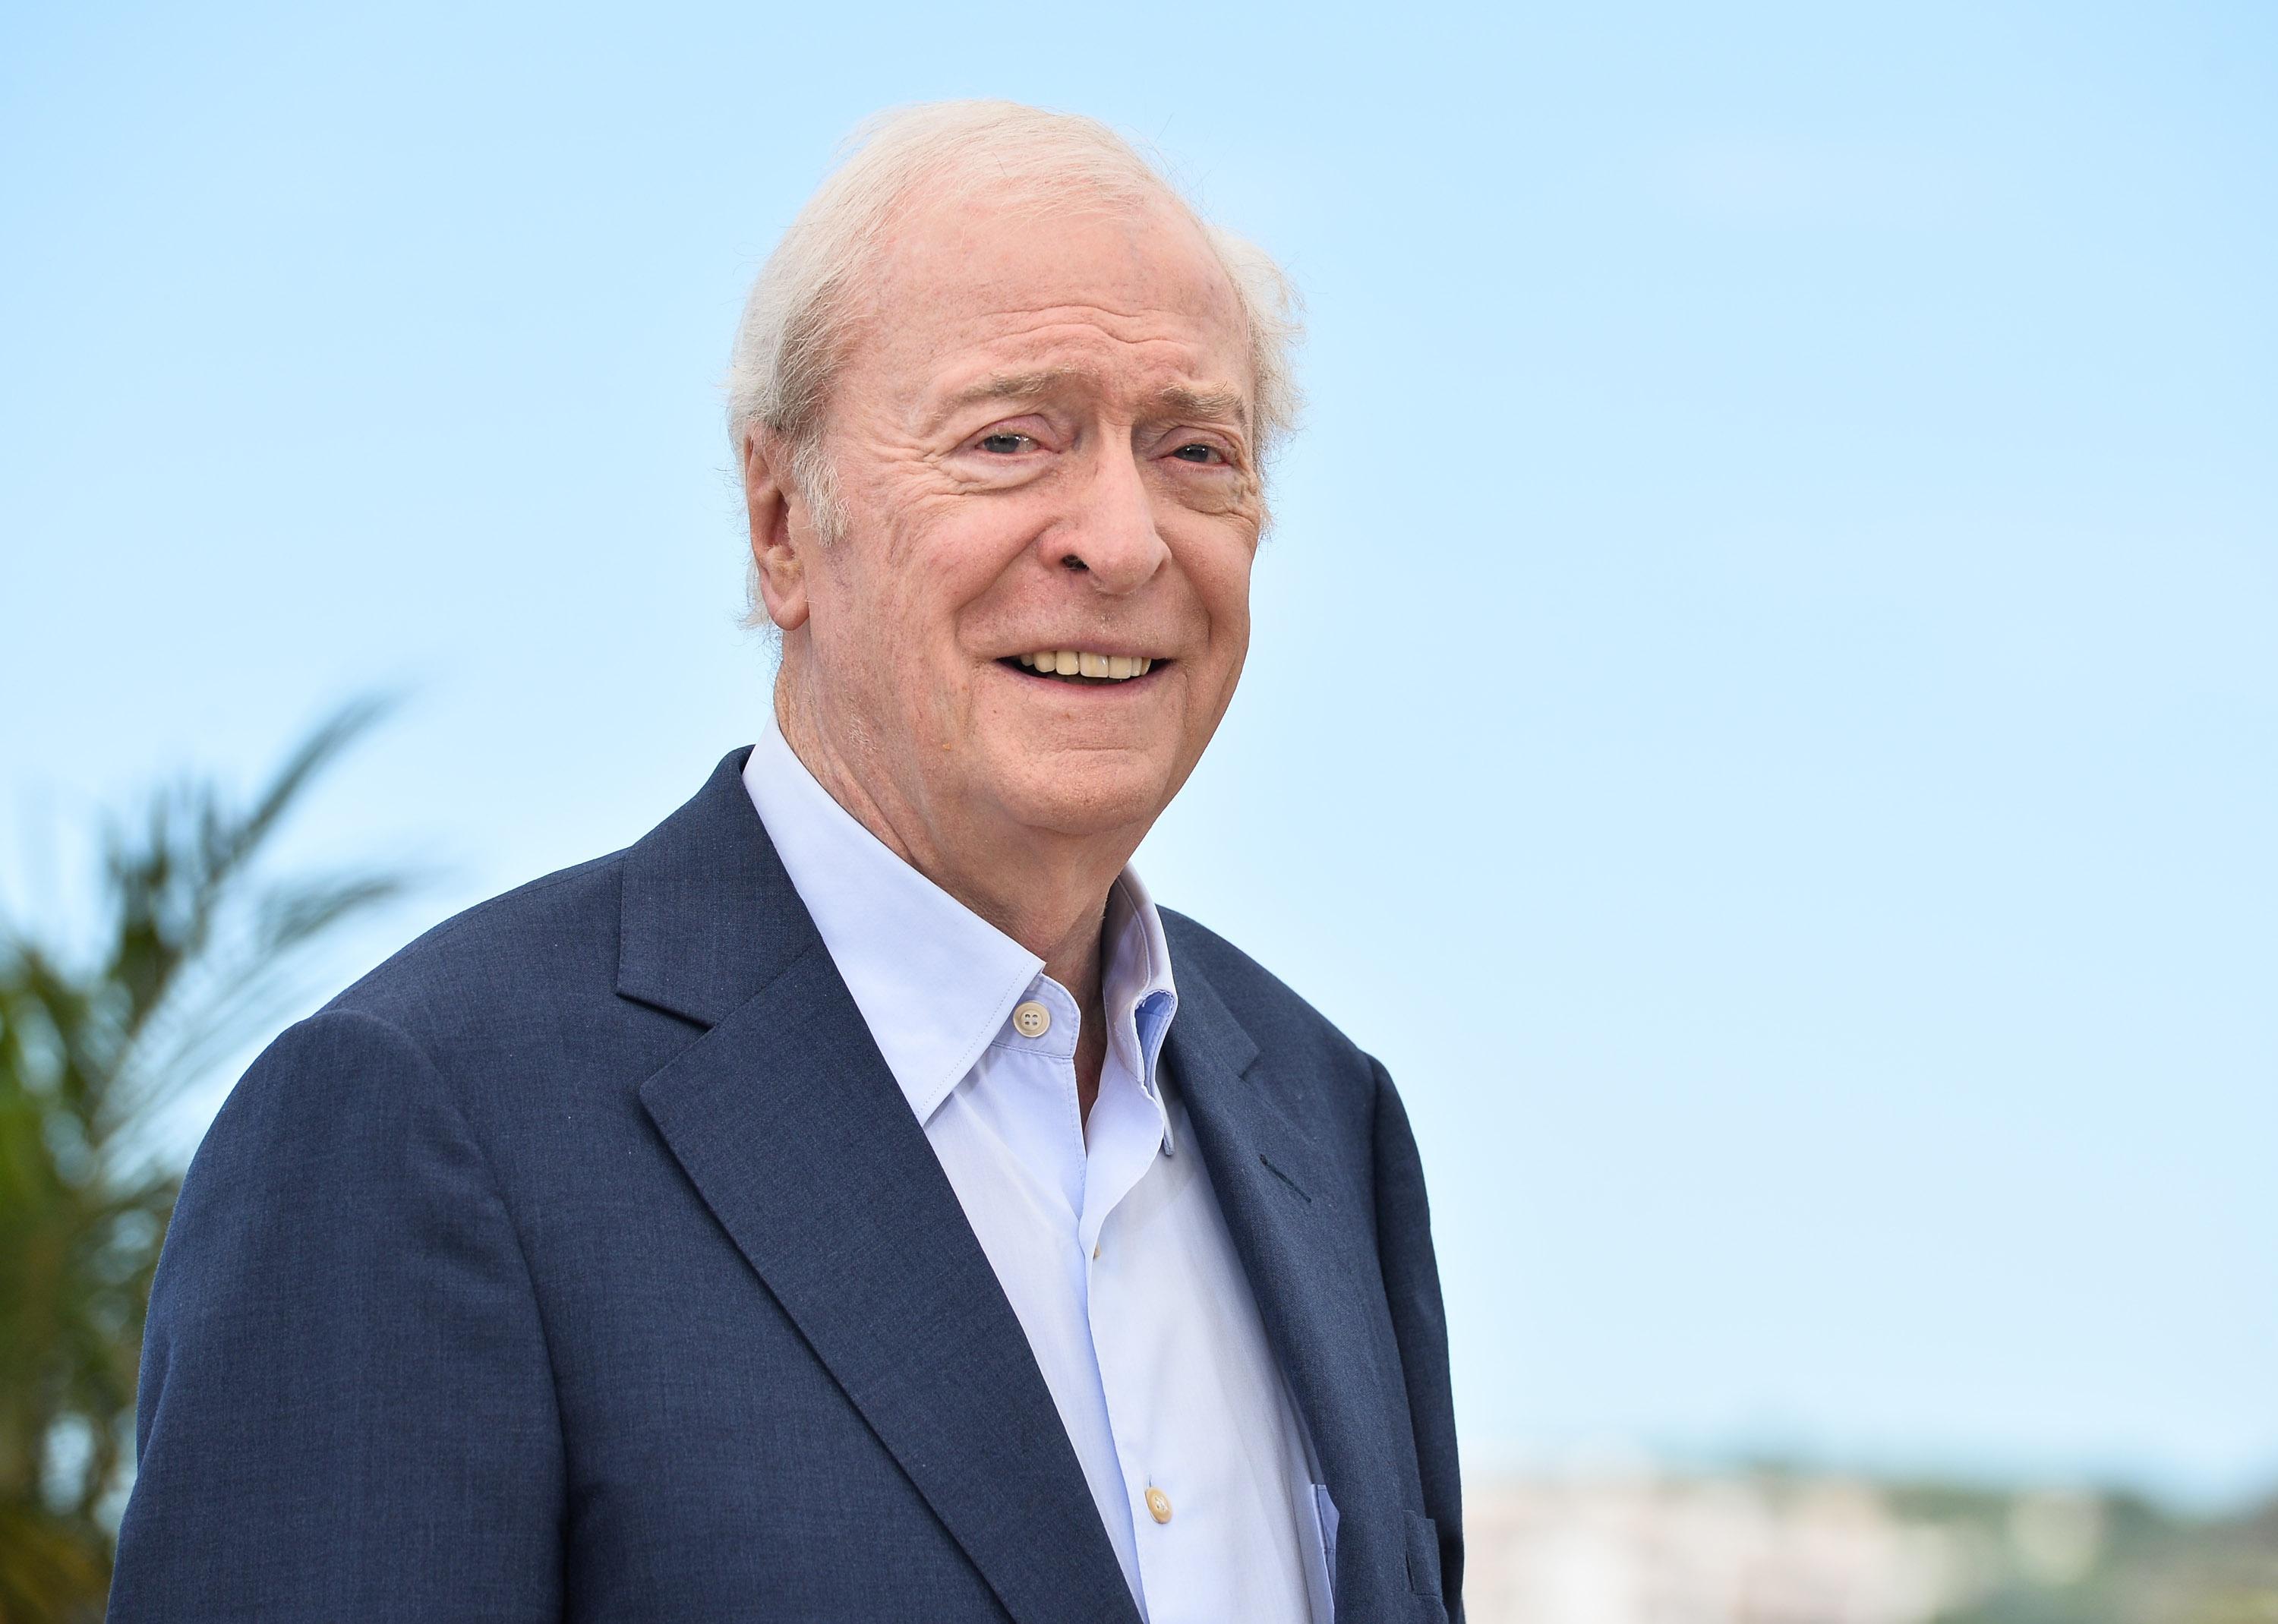 Michael Caine attends the "Youth" Photocall during the 68th annual Cannes Film Festival.